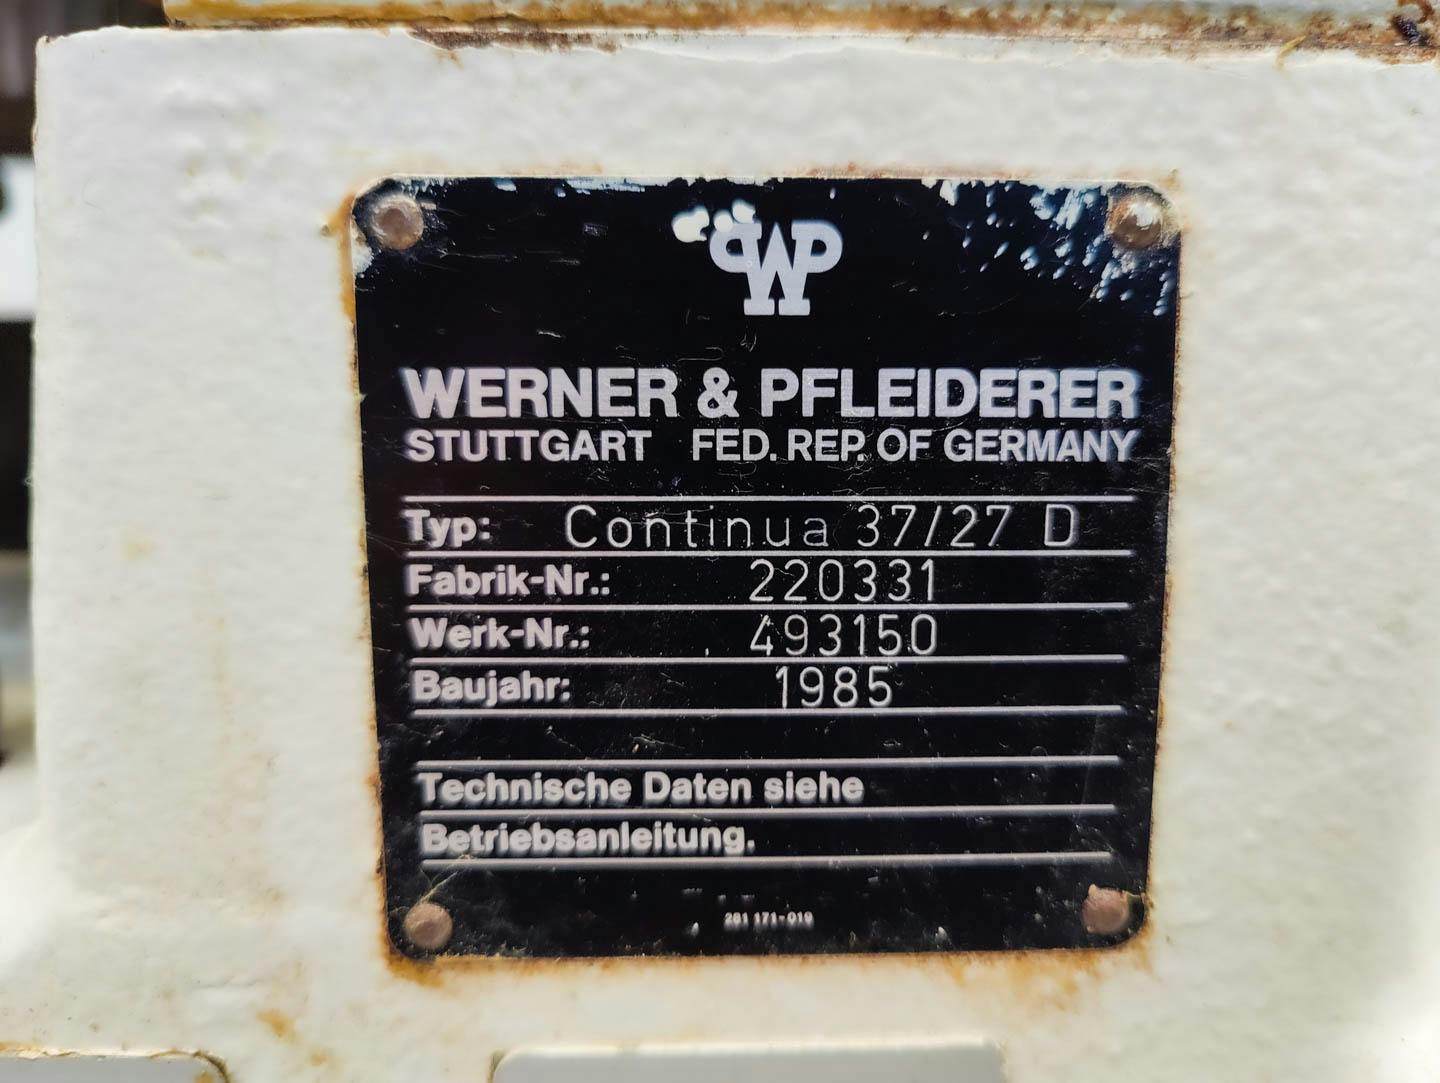 Werner & Pfleiderer Continua 37/27 D - Double screw extruder - image 12